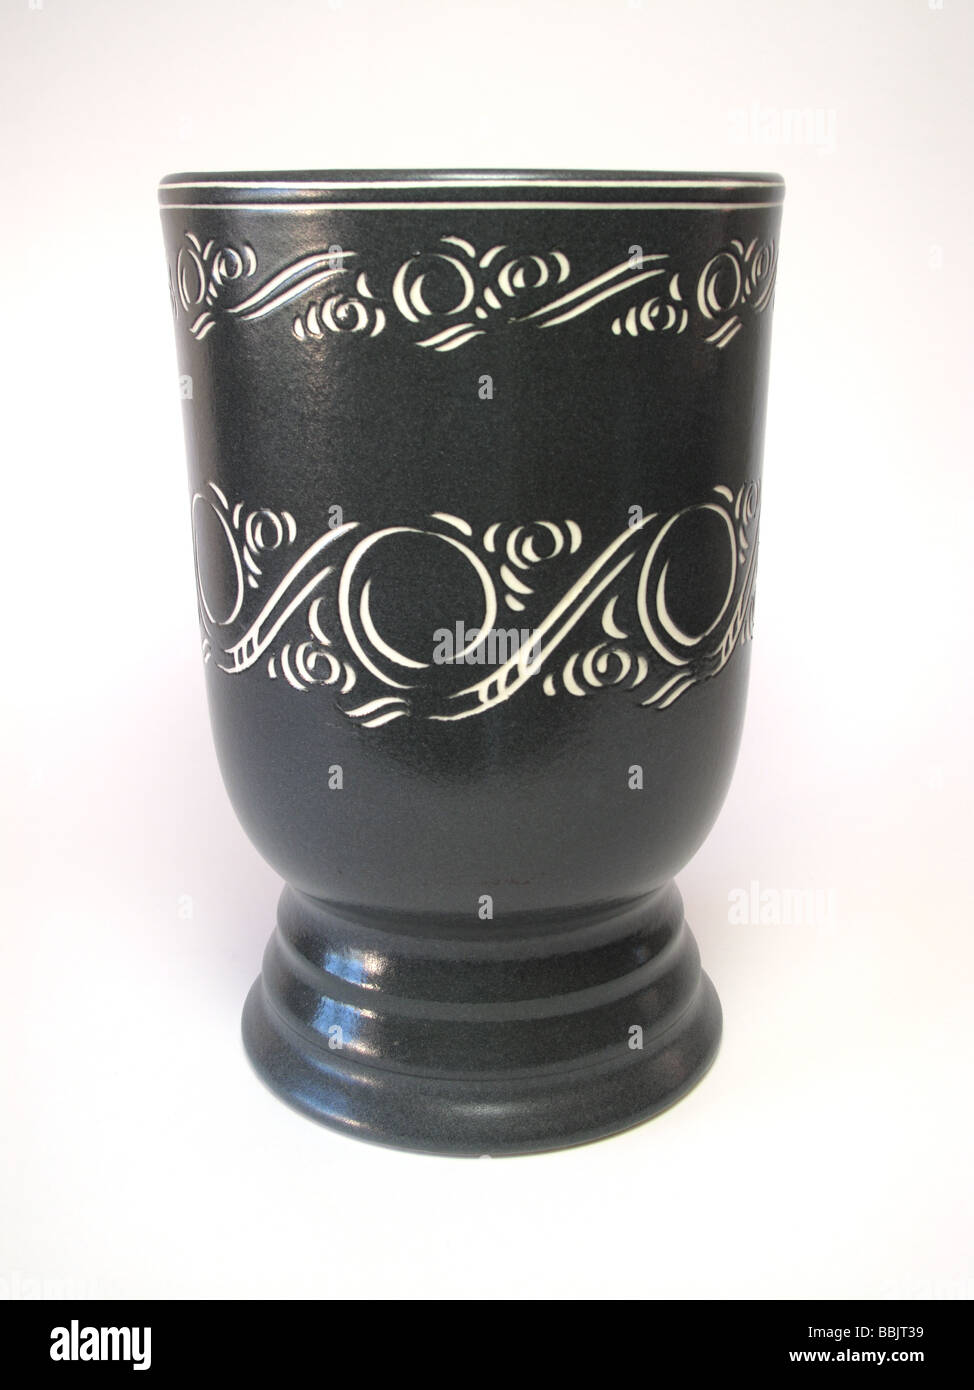 Pearsons of Chesterfield vase with sgraffito decoration Stock Photo